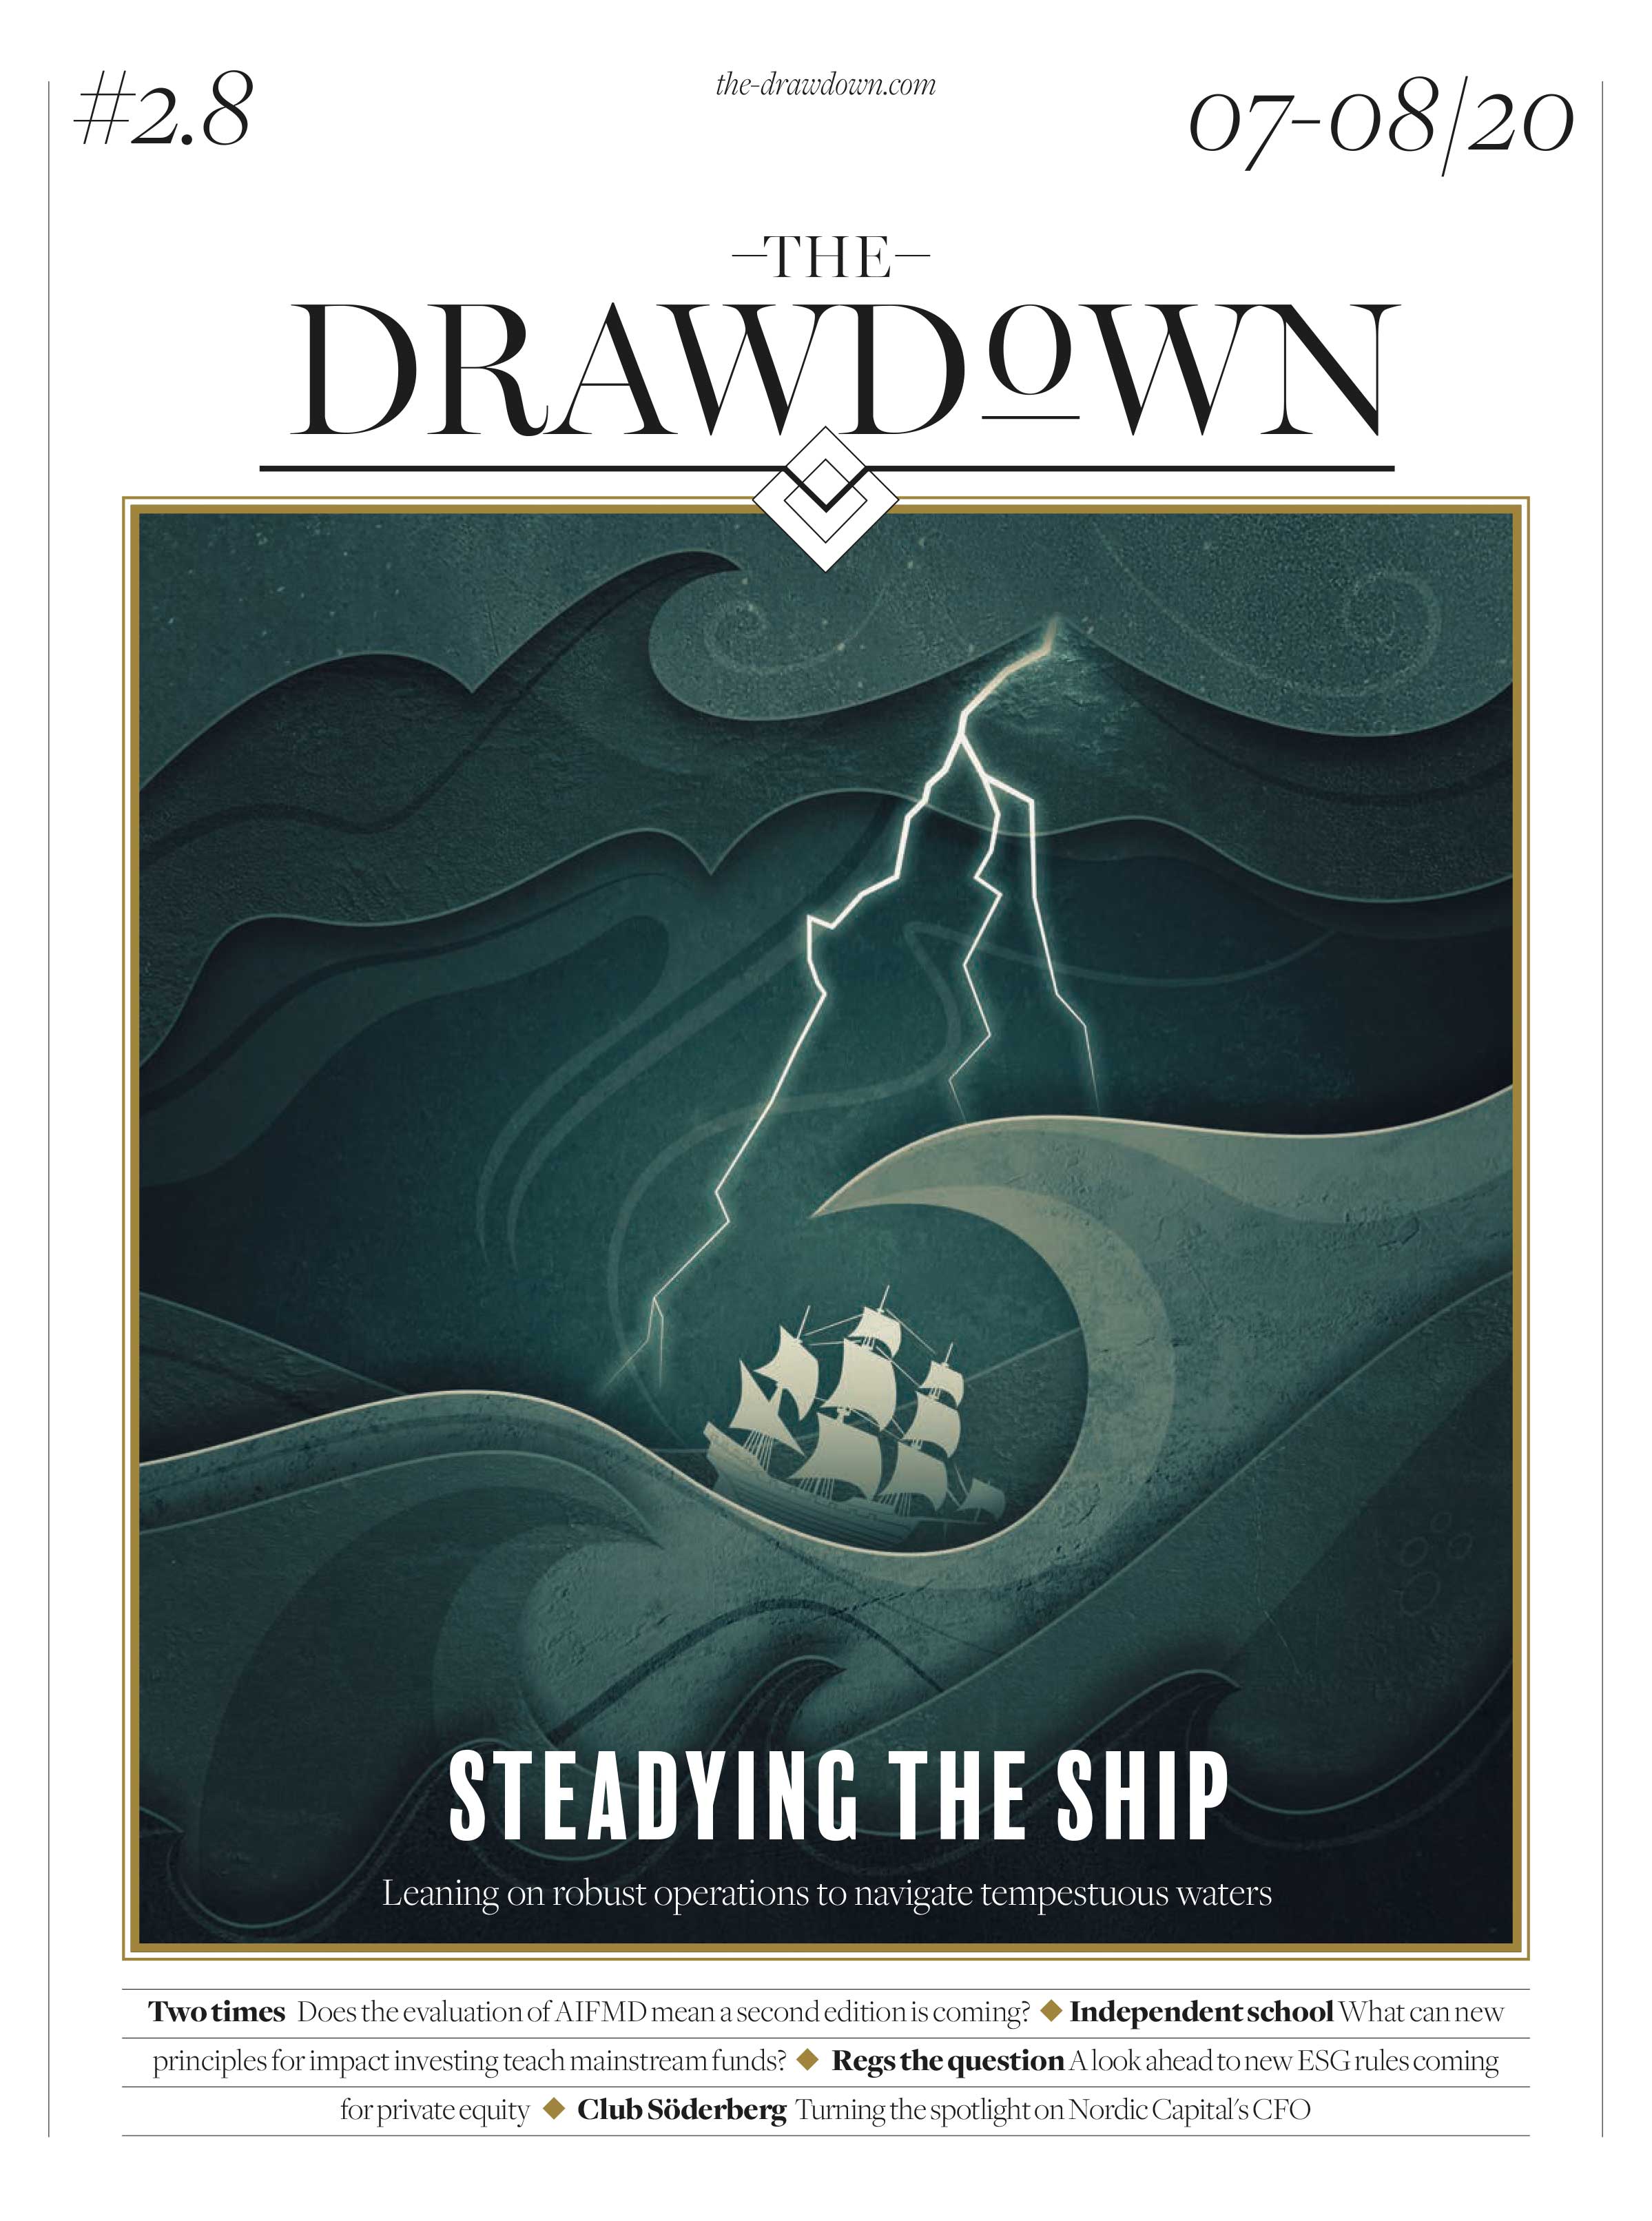 The Drawdown Issue July-August 2020 Cover